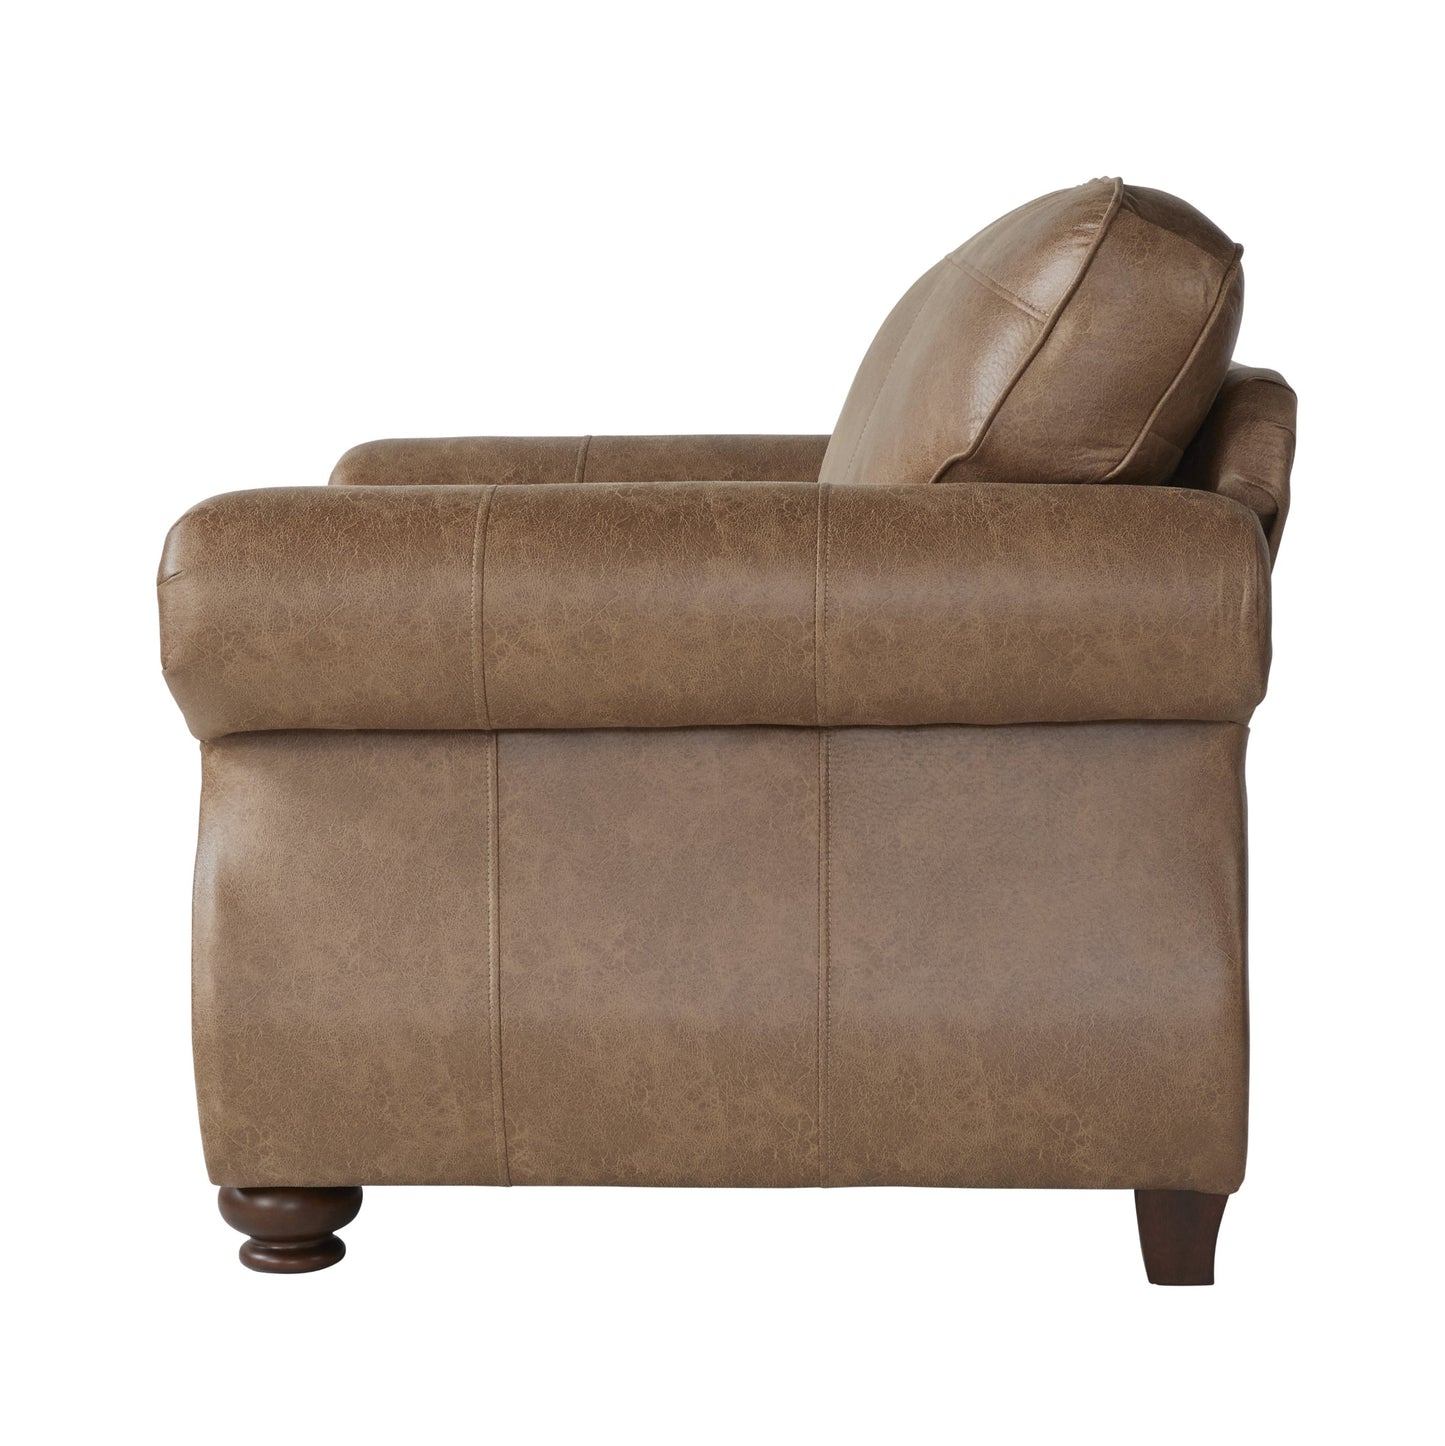 Leinster Faux Leather Armchair with Antique Bronze Nailheads in Jetson Ginger